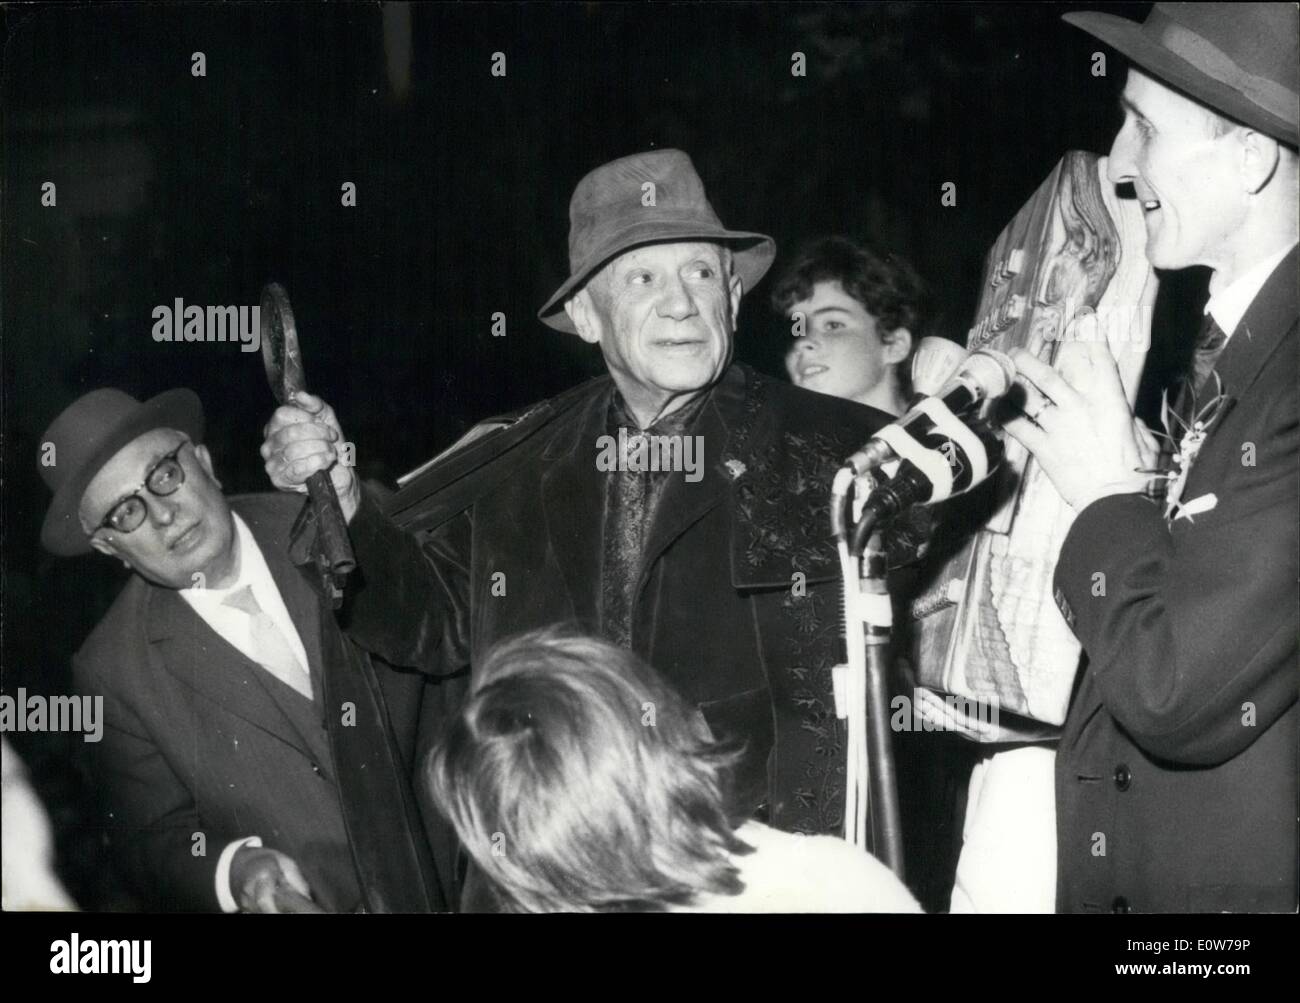 Oct. 10, 1961 - Vallauris and Riviera celebrate Picasso's 80th birthday. Vallauris, the small town in province famous for its pottery decorated by Picasso, celebrated the 80th birthday of the great painter who has been resident in the town for many years. photo shows Picasso holding the huge token key of the city which the Mayor (right) presented him with. At left, Jacques Duclos who was present at the ceremony. Stock Photo